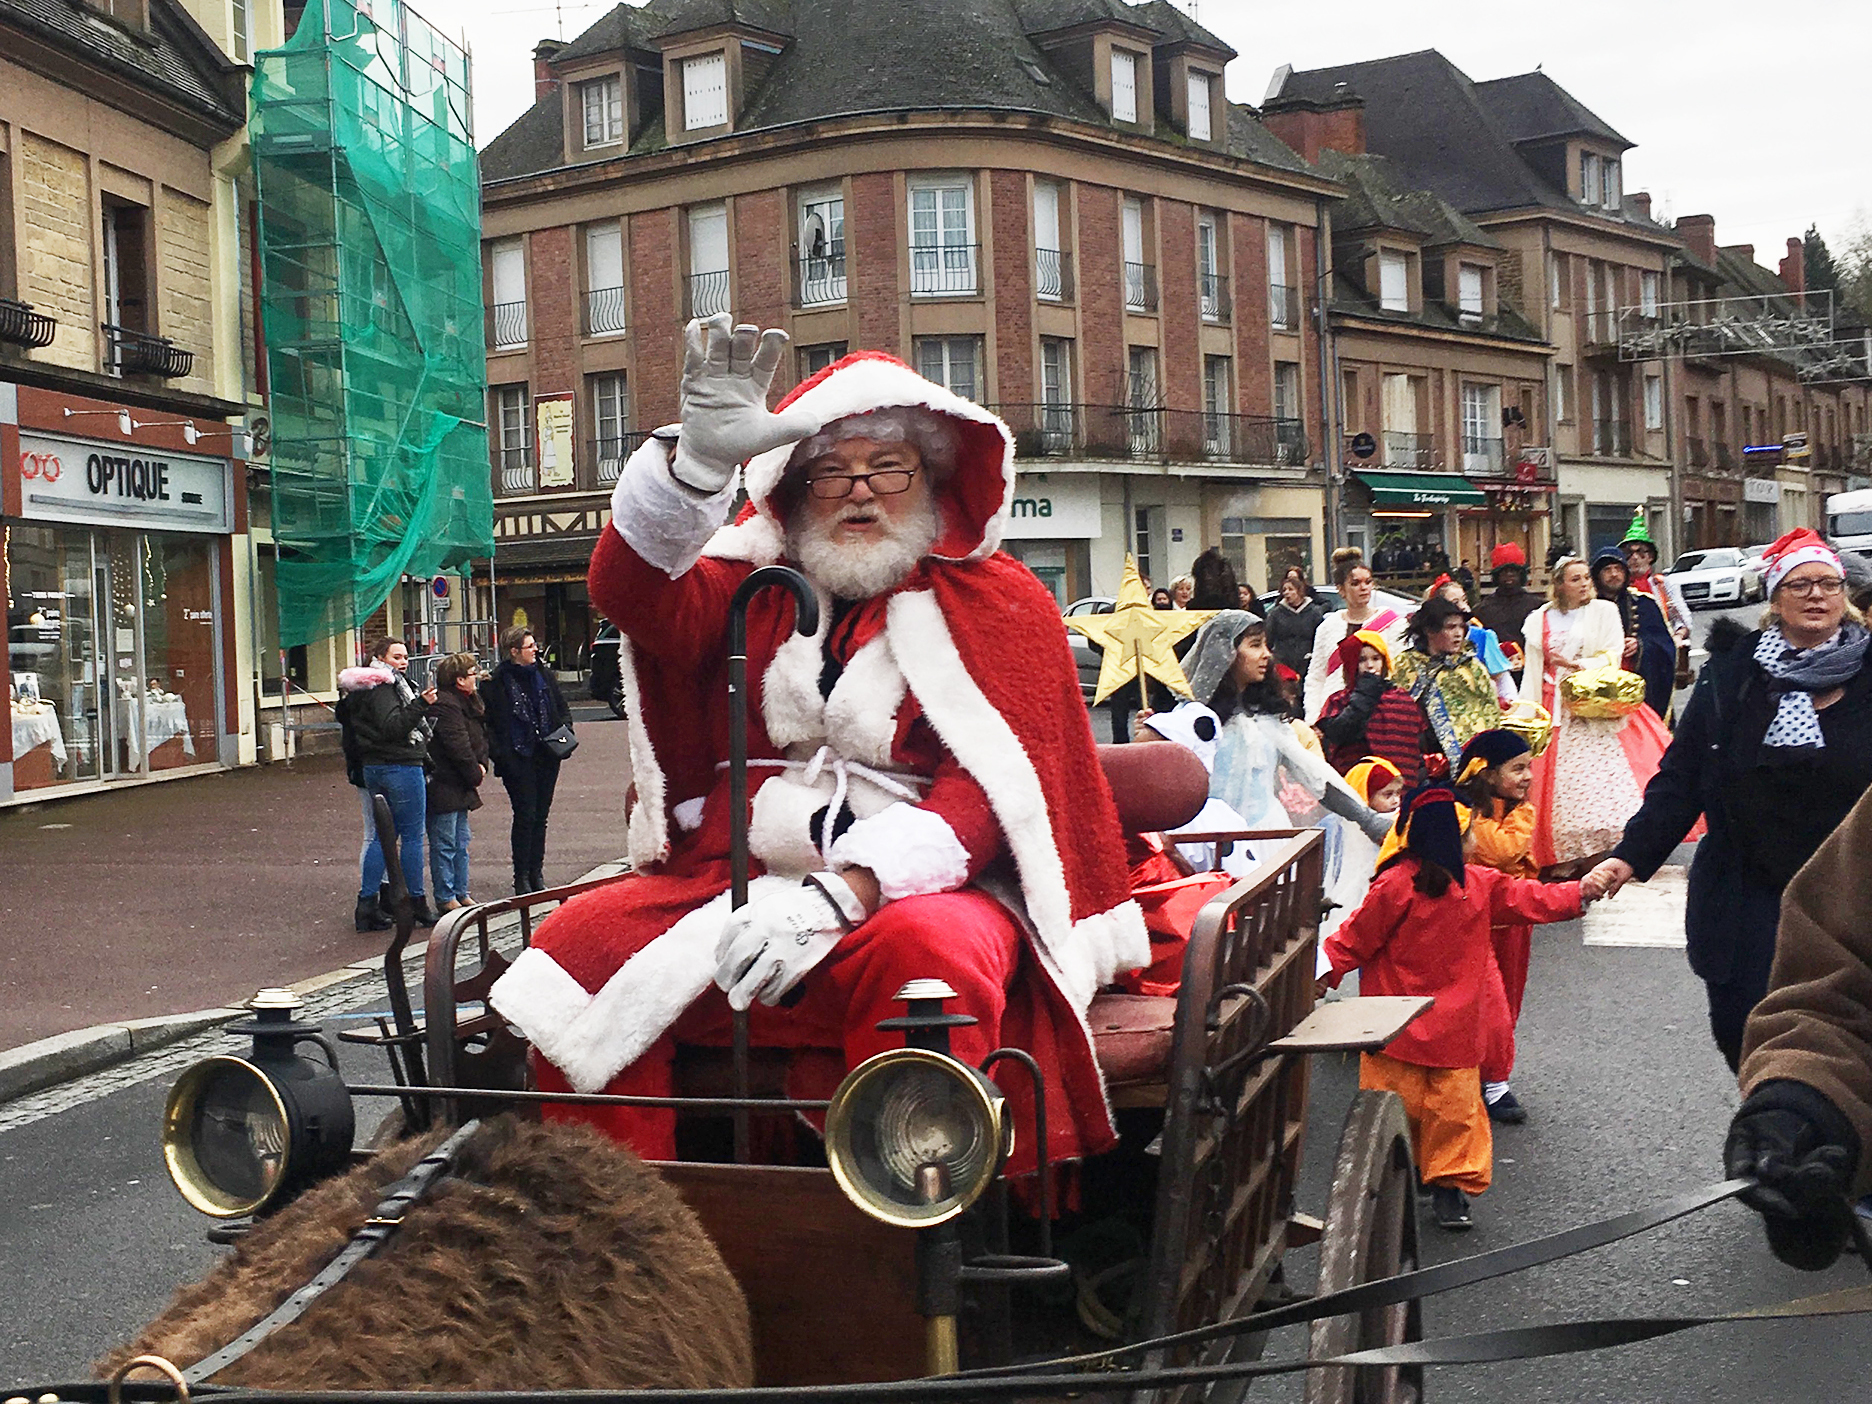 Retired American photographer Tom Haley, 66, portrays Santa during a pageant in Normandy. (Photo by Eleanor Beardsley/NPR)